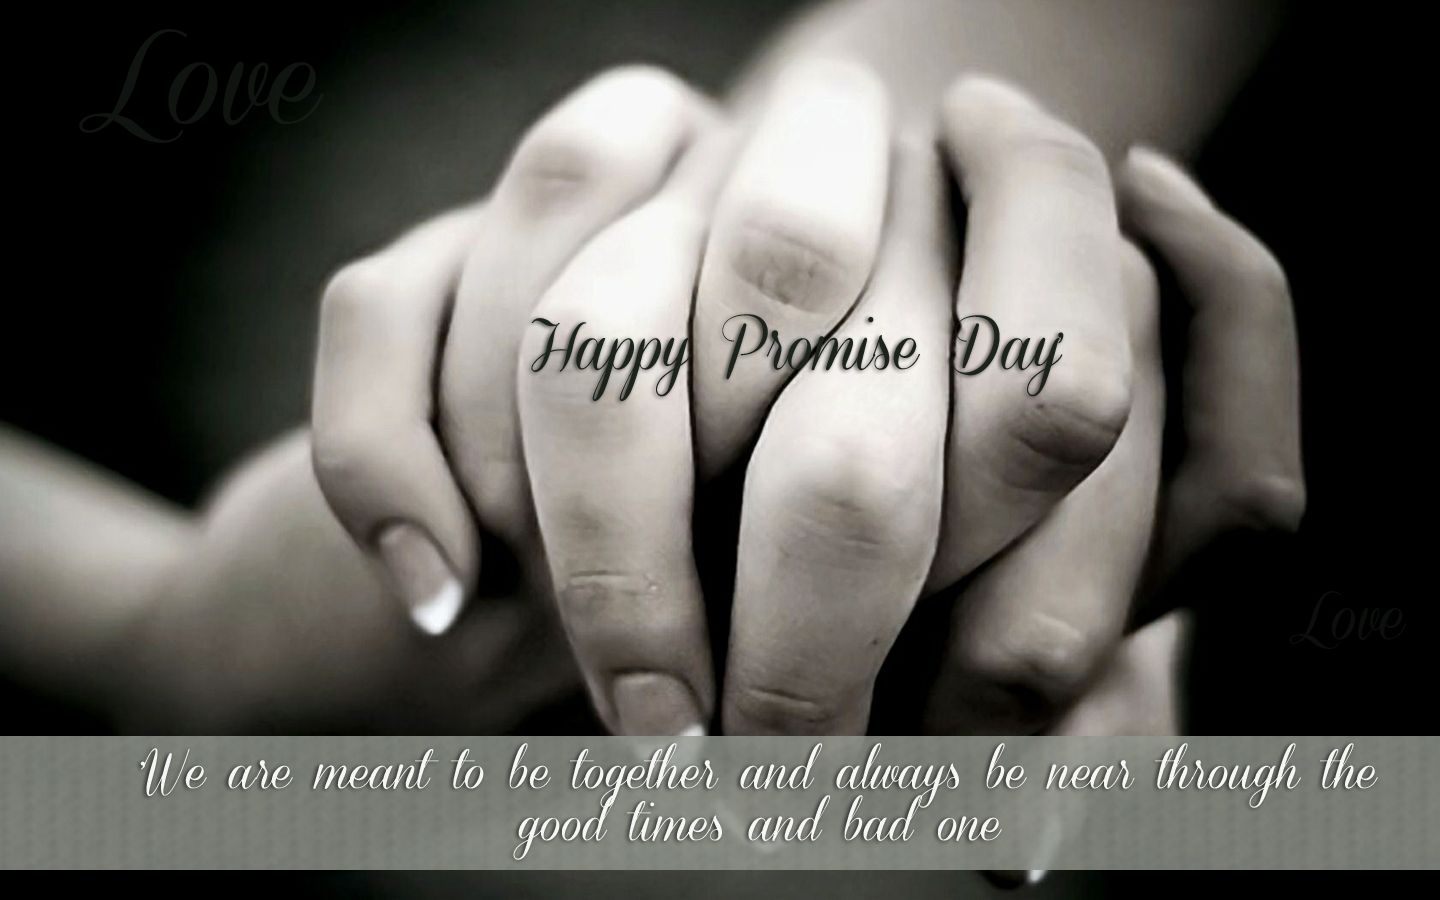 Download, Send, Promise Day Wishes, E-Greetings, Promise Day, Promise Day – 11 February, Happy Promise Day, Promise Day 2015, Joint Hands